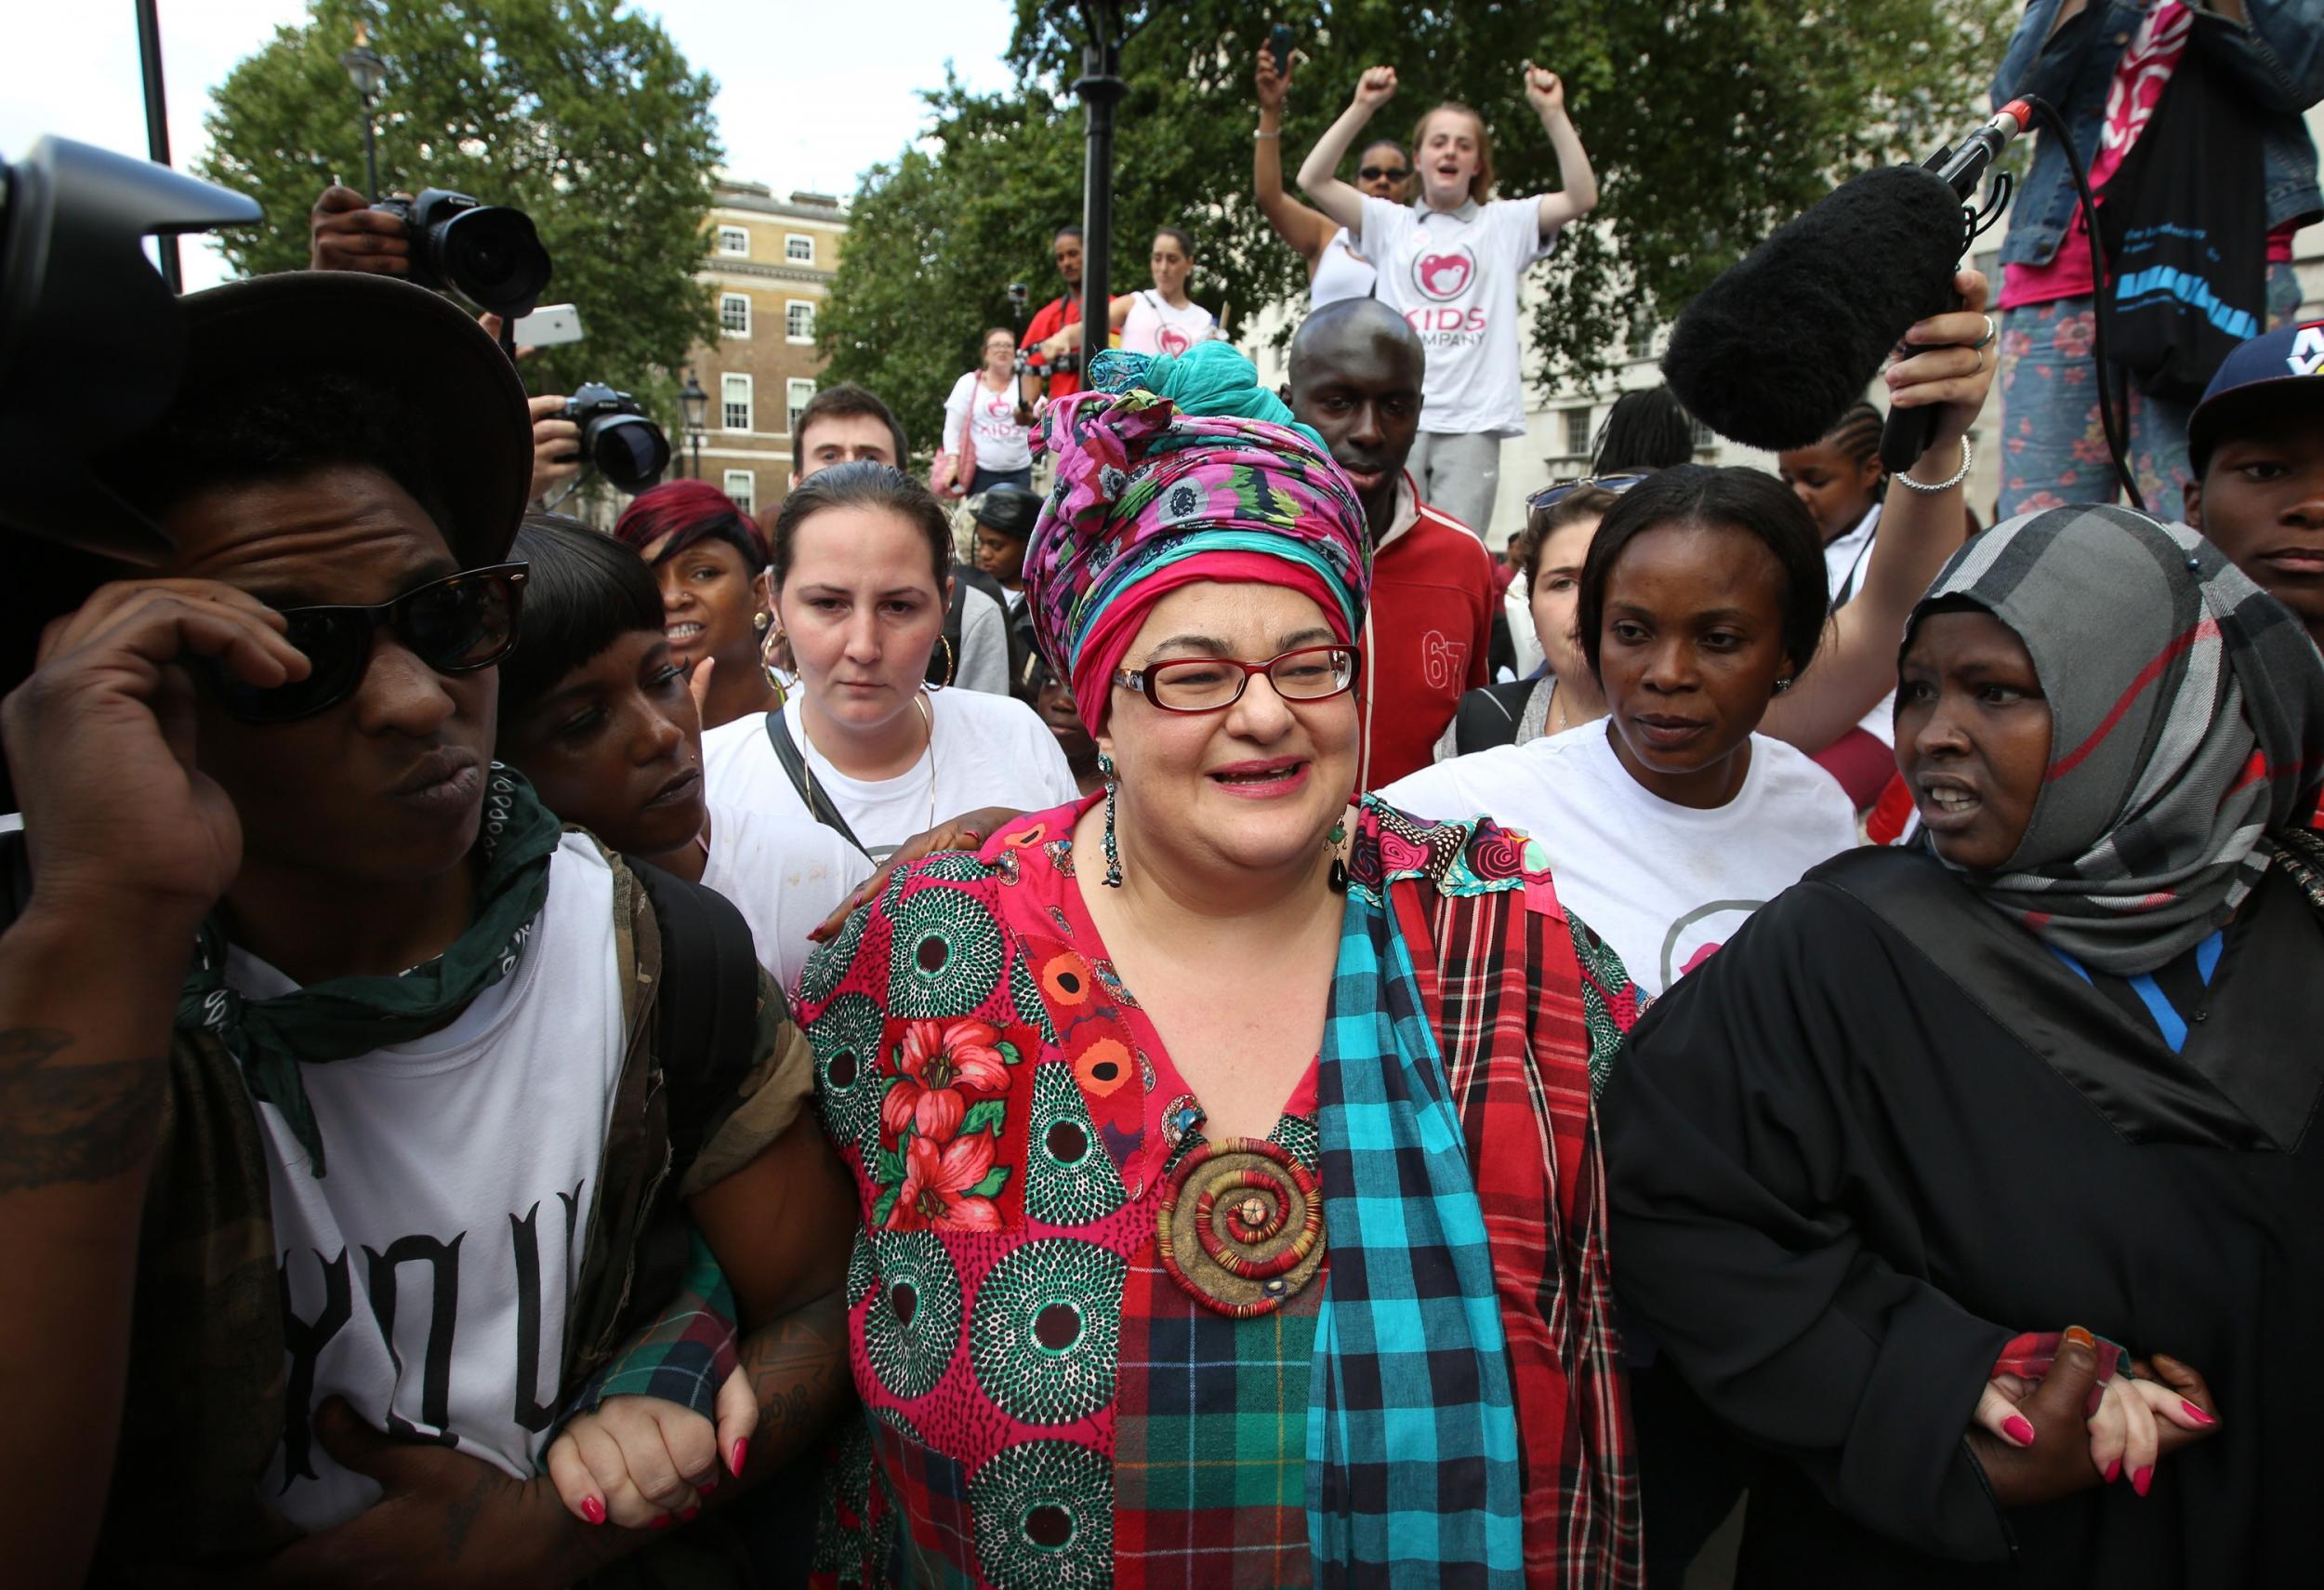 &#13;
Kids Company founder, Camila Batmanghelidjh has been mired in allegations of mismanagement and misconduct. &#13;